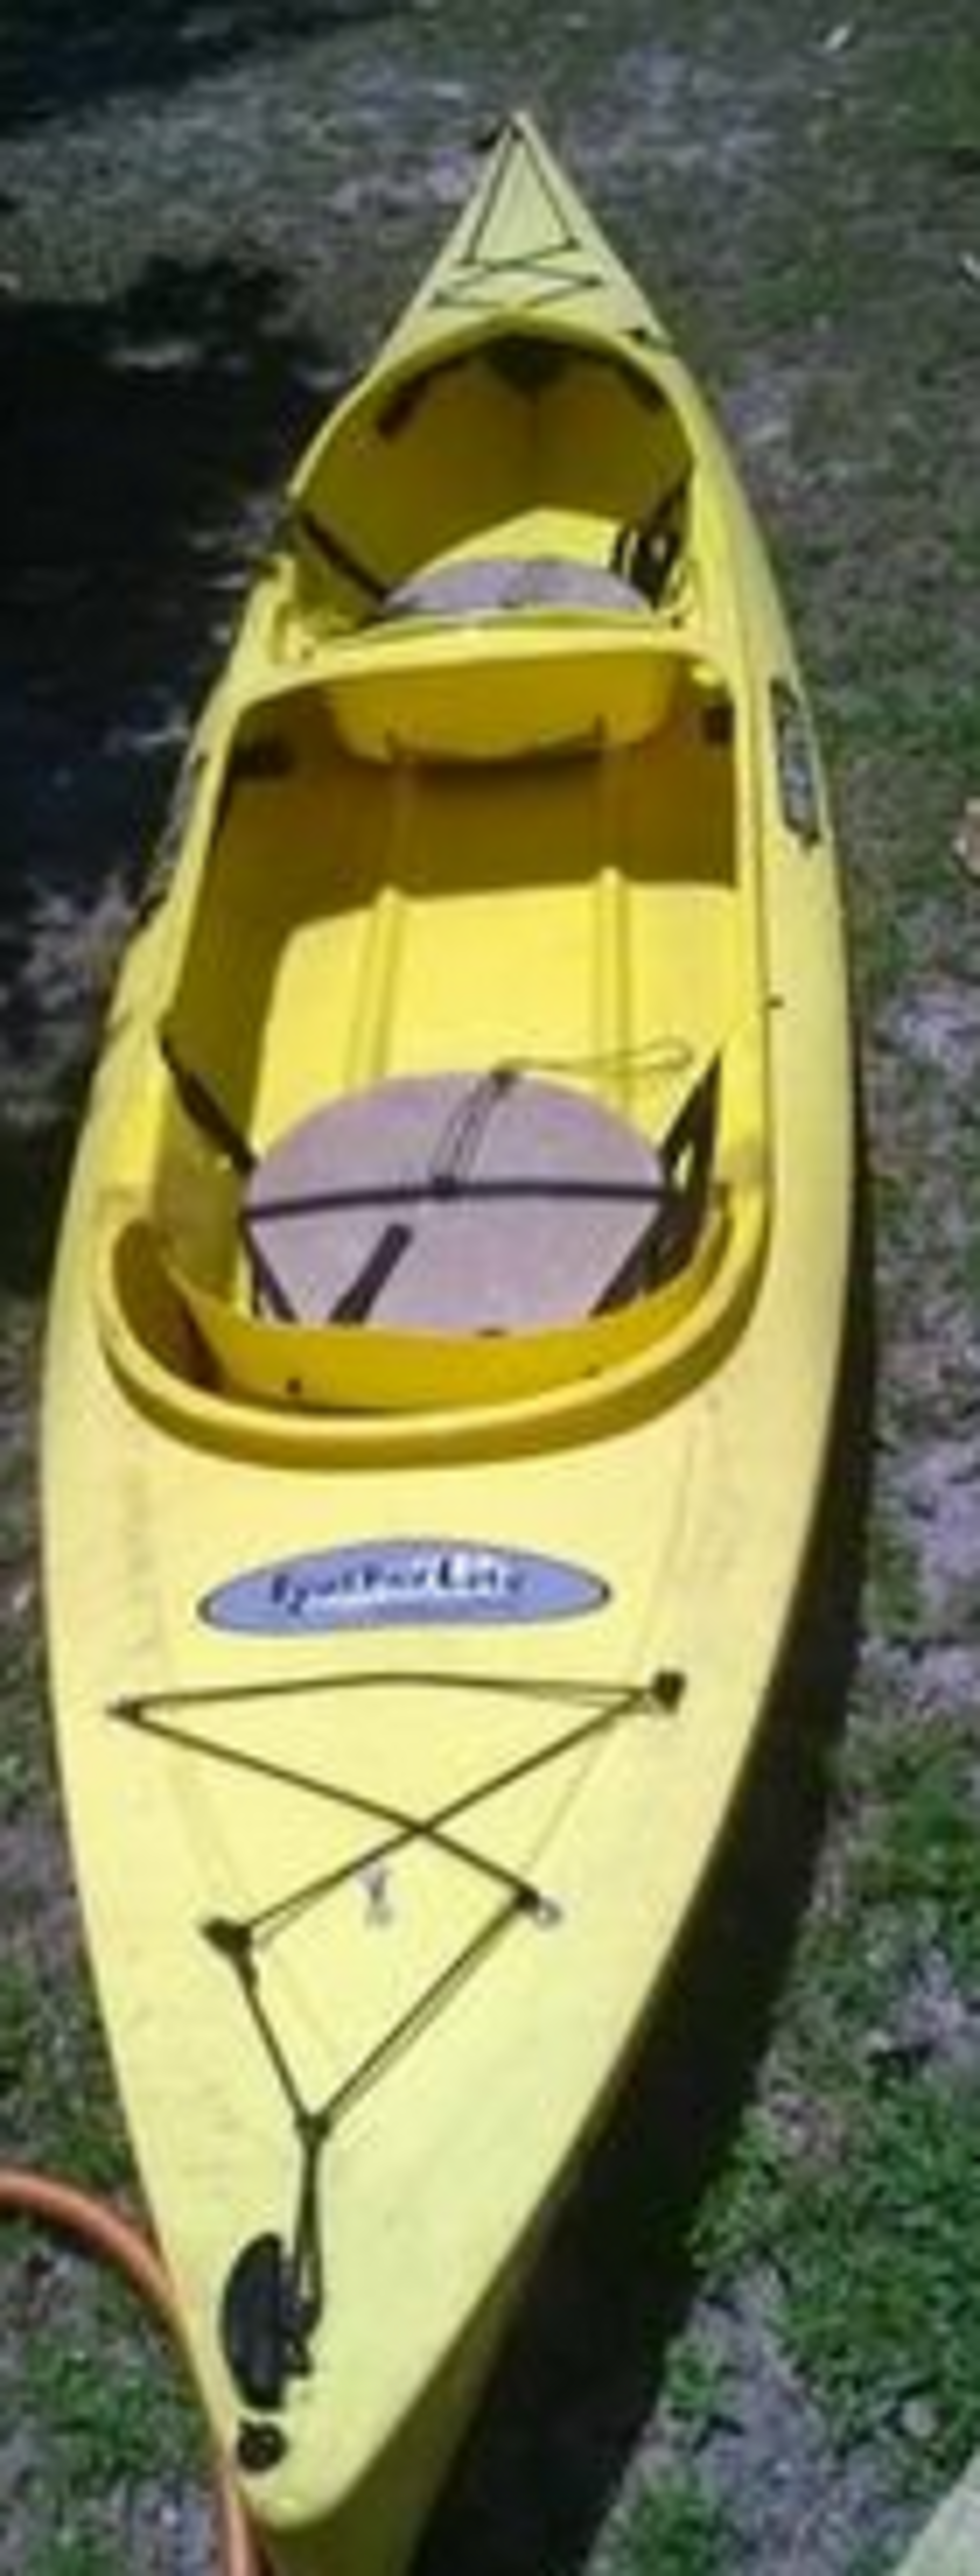 Lost Kayak Located And Returned to Owner